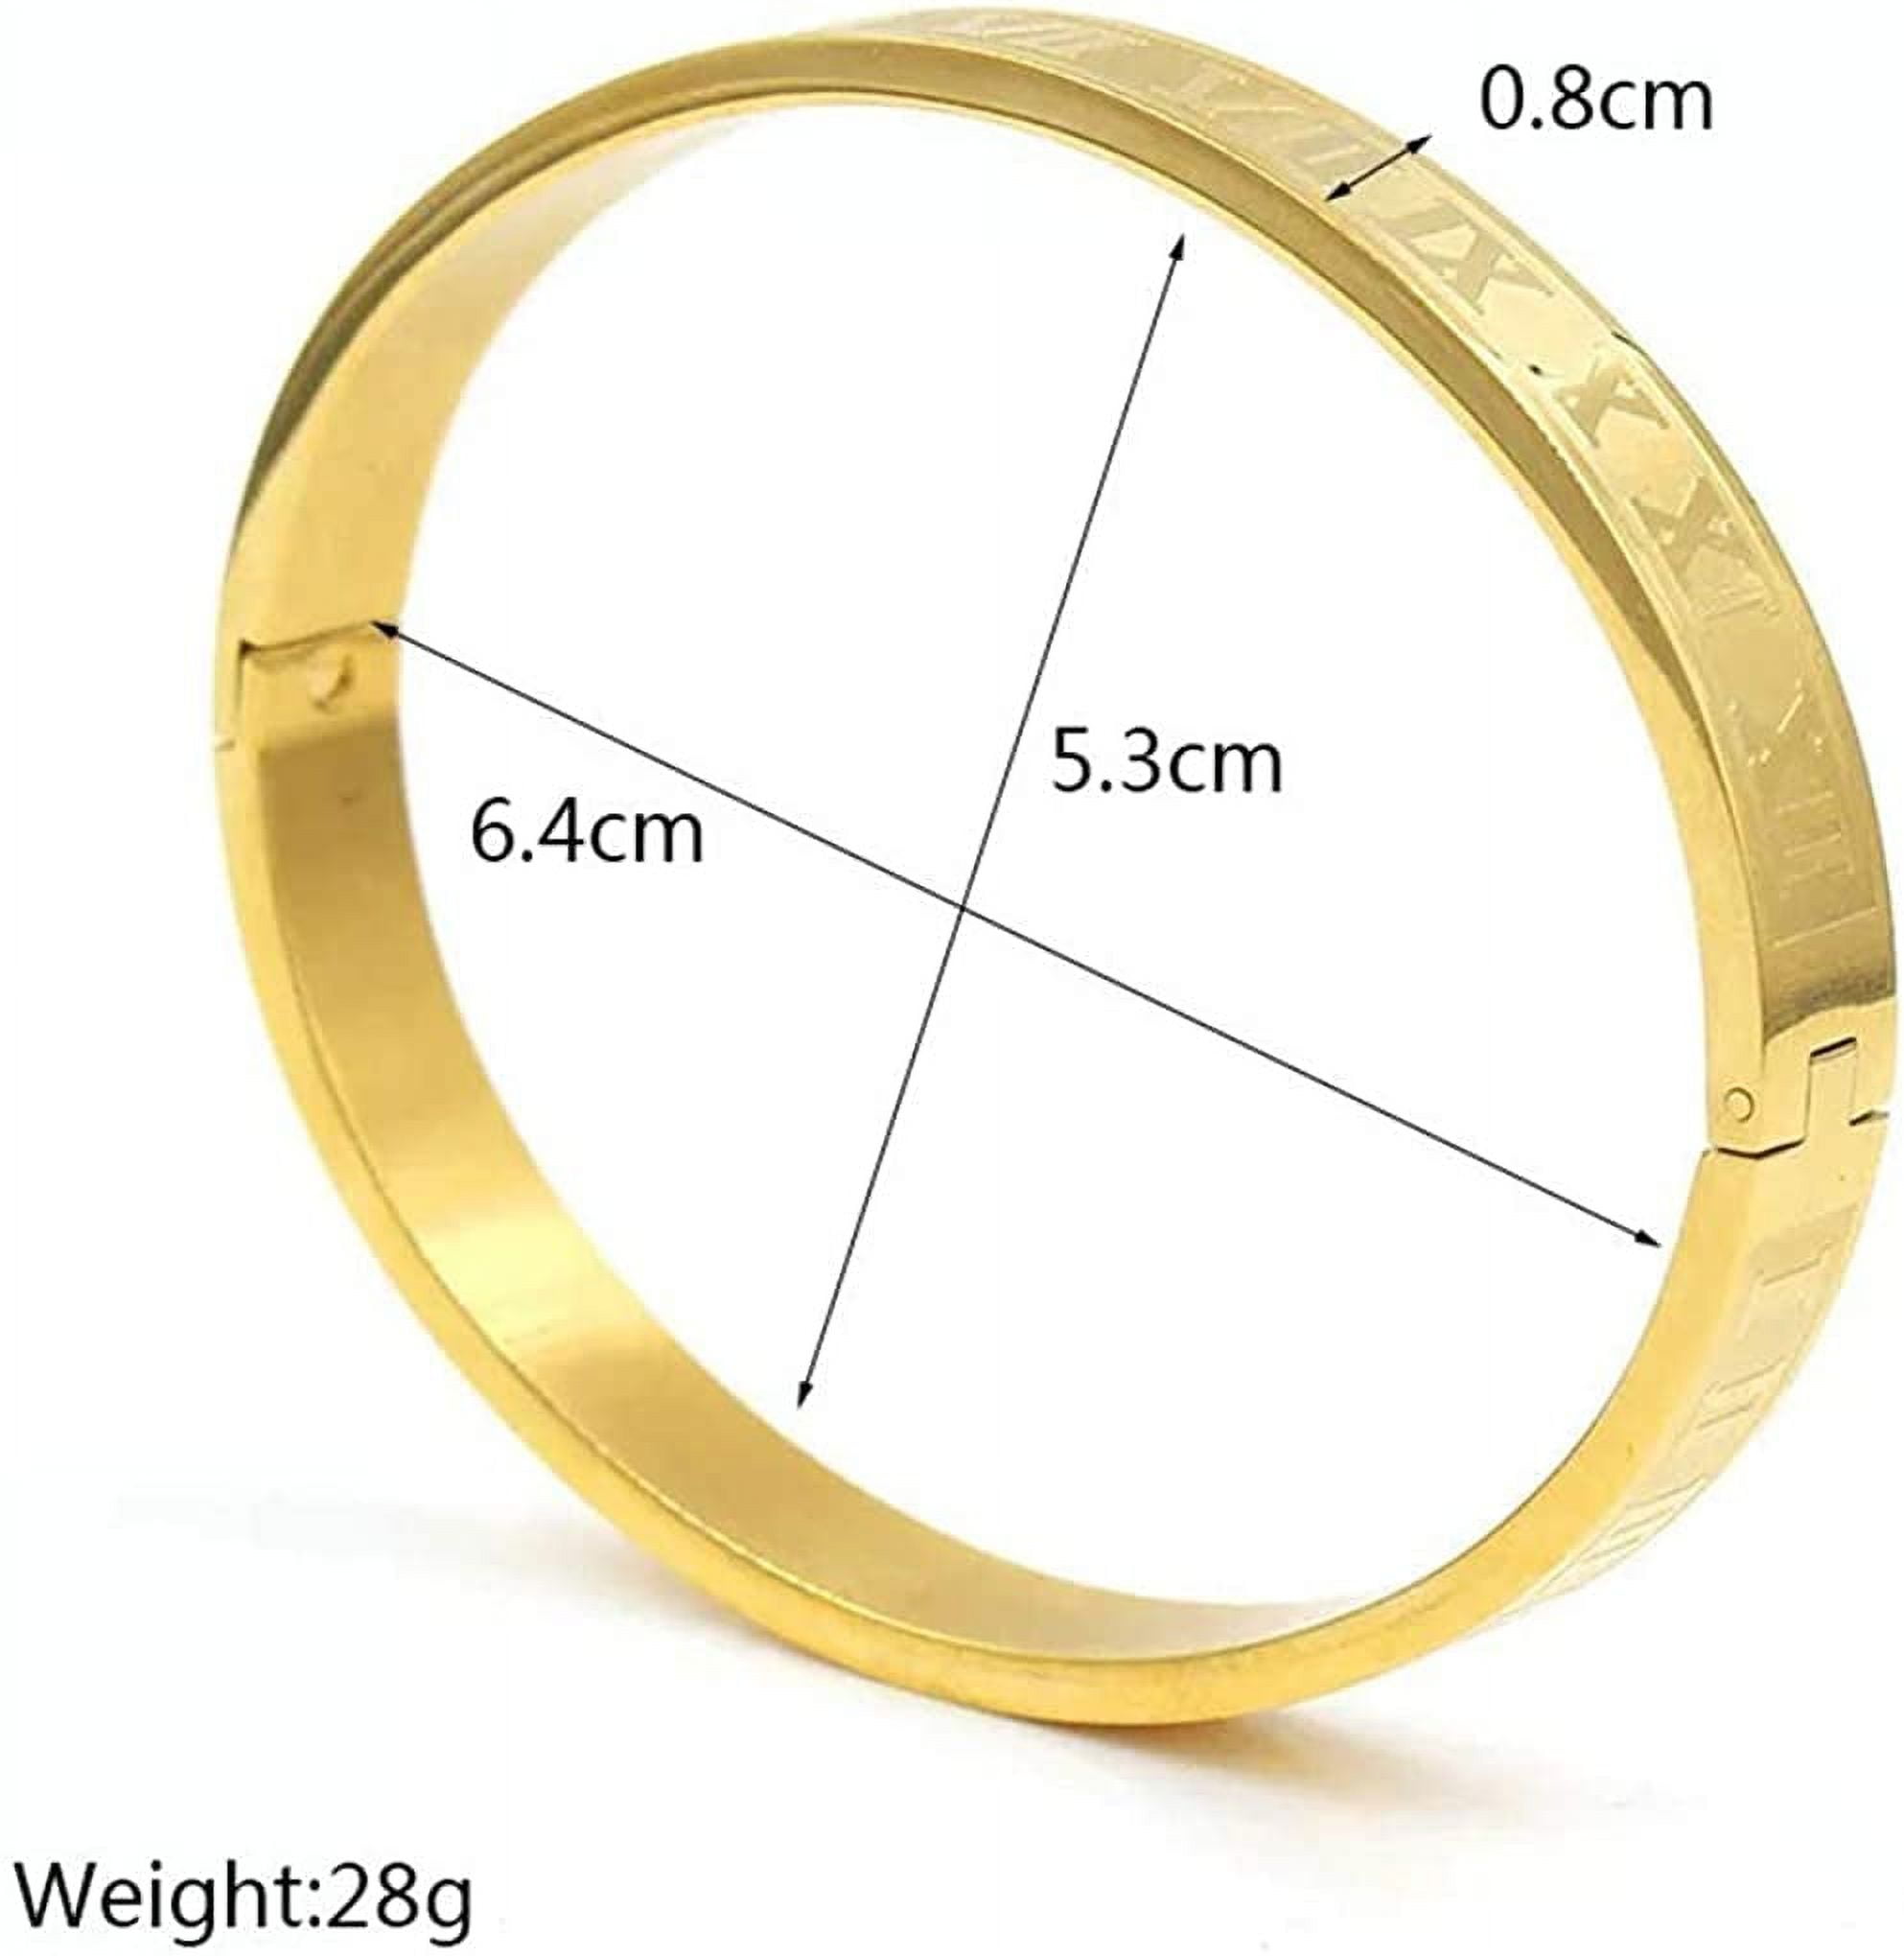  Jaline Gold Silver Rose Gold Plated Bracelets for Men Women  Roman Numeral Bangle Bracelet Stainless Steel Personalized Engraved Unisex  Gift (2 Pcs Mens Rose-Gold Bangle): Clothing, Shoes & Jewelry